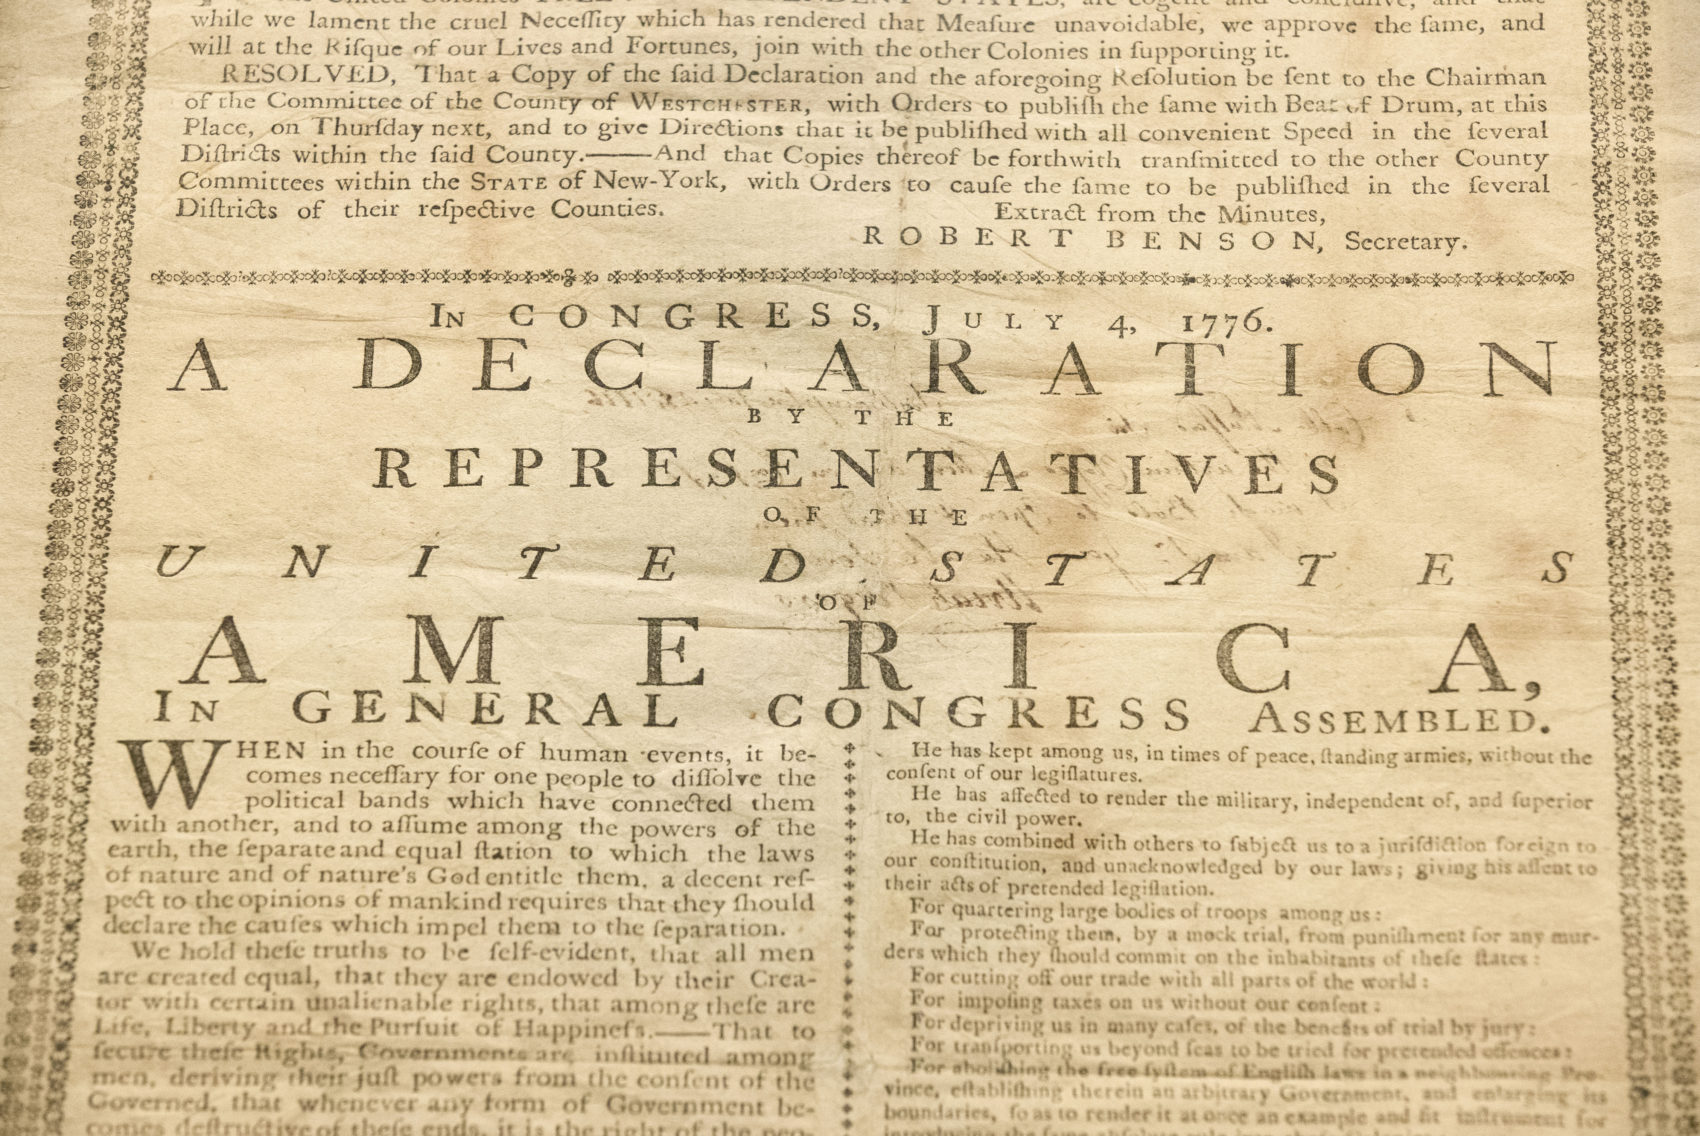 Original Copy Of Declaration Of Independence On View At Dorchester Museum |  The ARTery